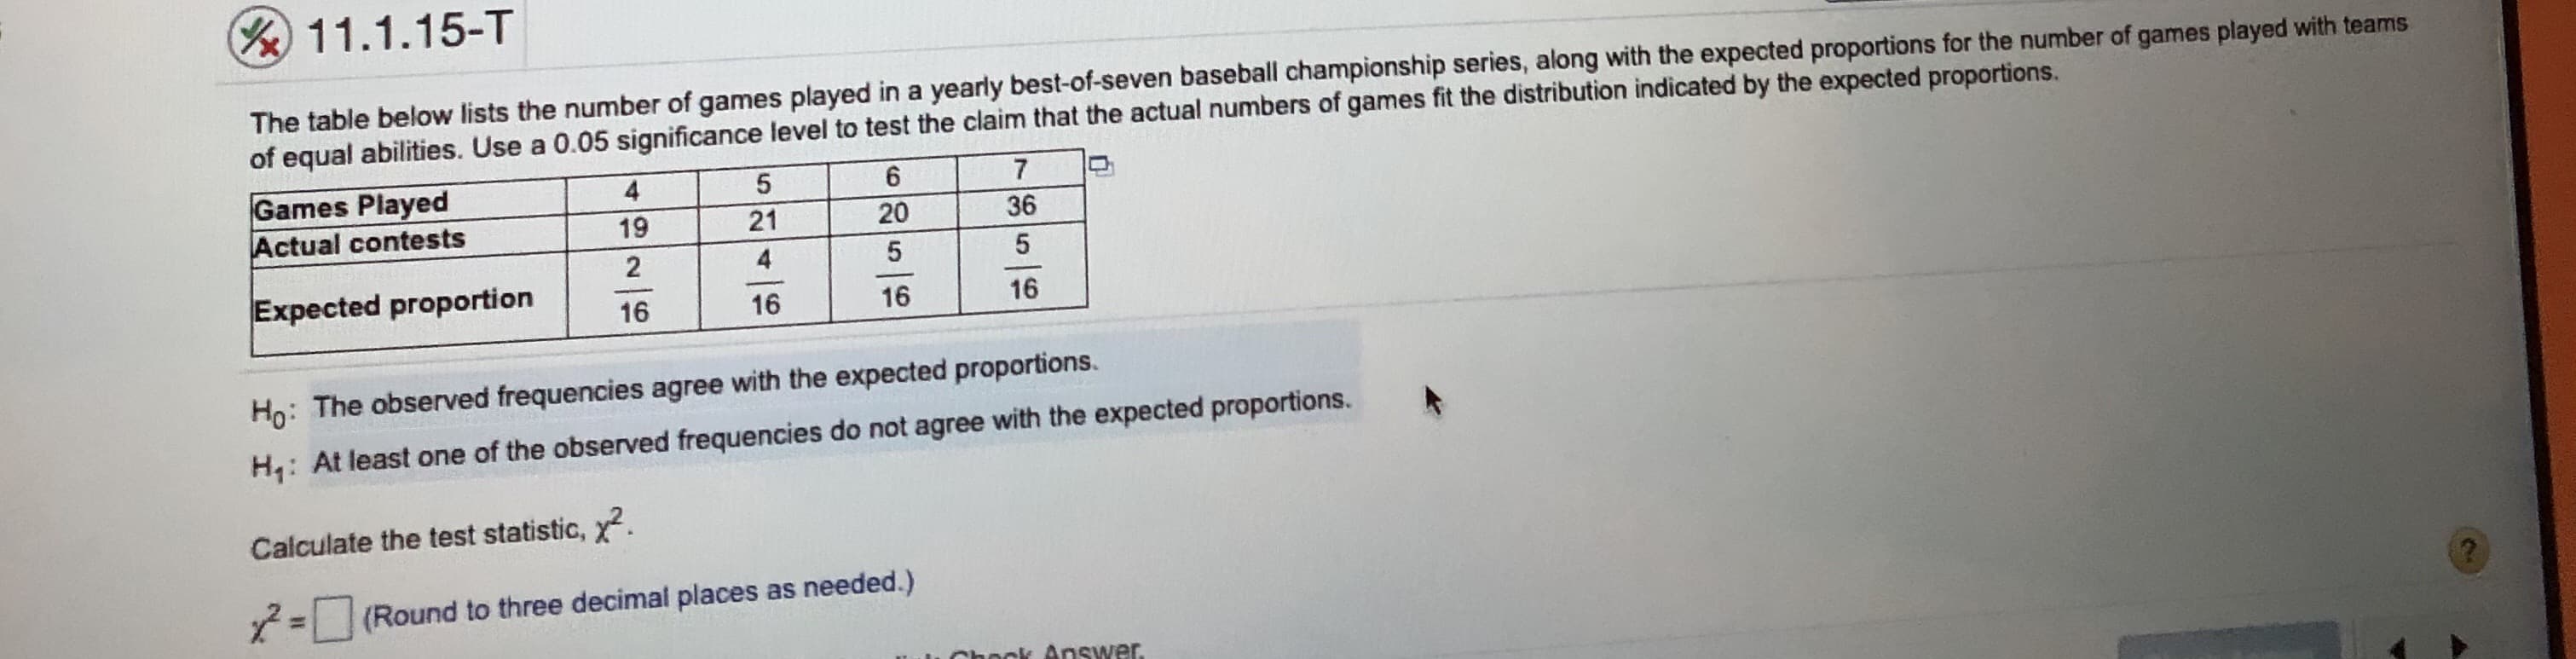 11.1.15-T
The table below lists the number of games played in a yearly best-of-seven baseball championship series, along with the expected proportions for the number of games played with teams
of equal abilities. Use a 0.05 significance level to test the claim that the actual numbers of games fit the distribution indicated by the expected proportions.
7
Games Played
Actual contests
19
21
20
36
Expected proportion
16
16
16
16
Ho: The observed frequencies agree with the expected proportions.
H: At least one of the observed frequencies do not agree with the expected proportions.
Calculate the test statistic, x.
=(Round to three decimal places as needed.)
ok Answer
